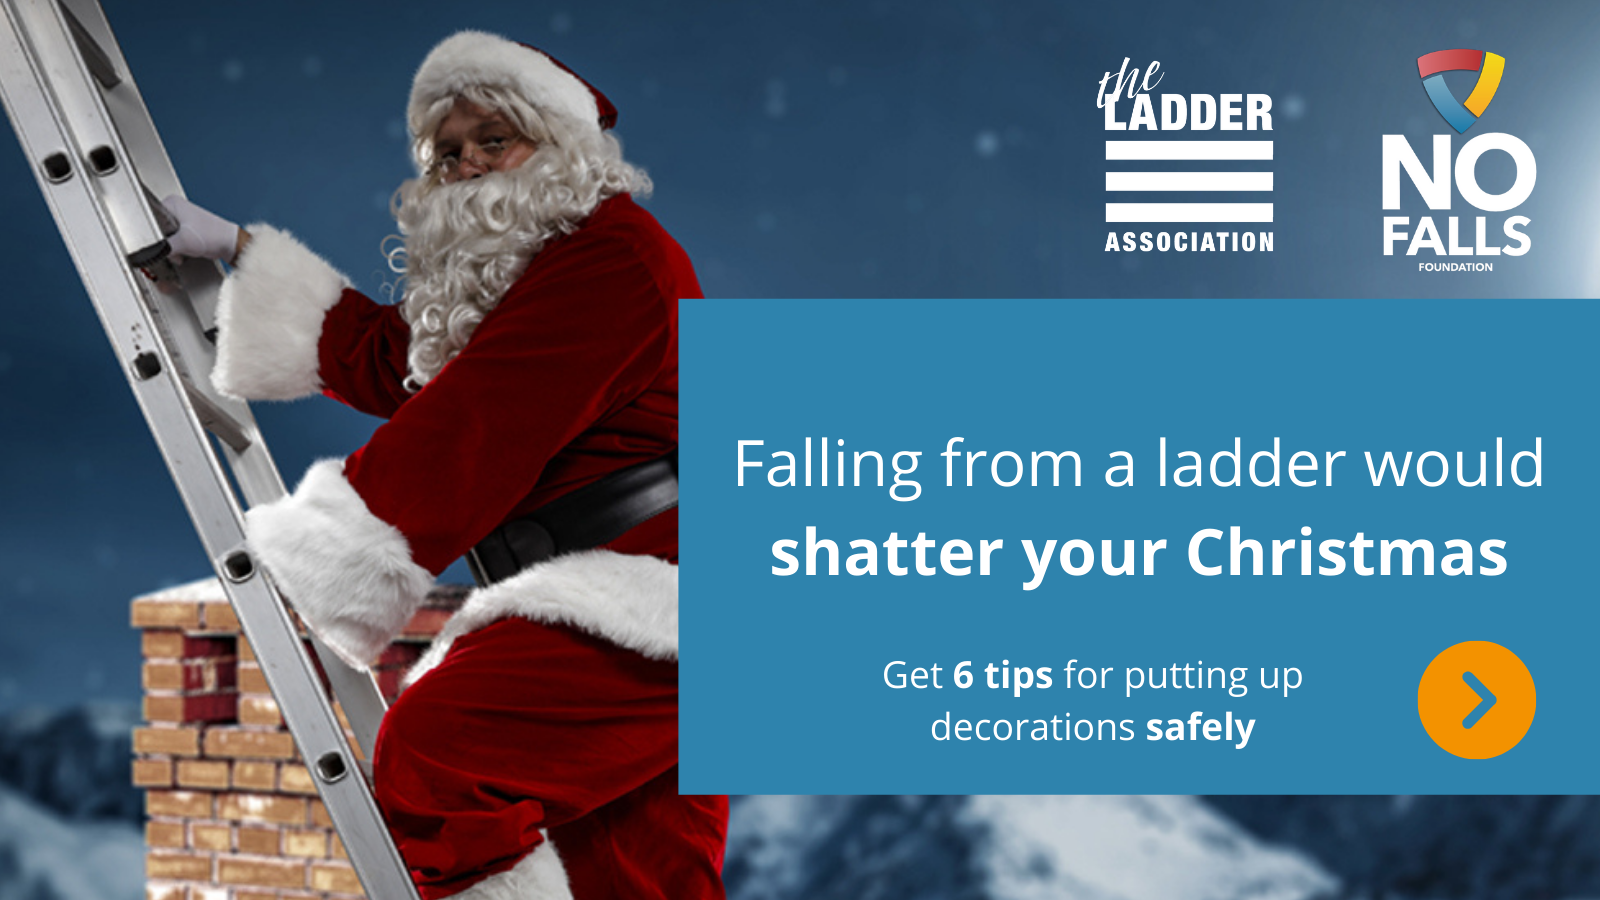 Falling from a ladder would shatter your Christmas